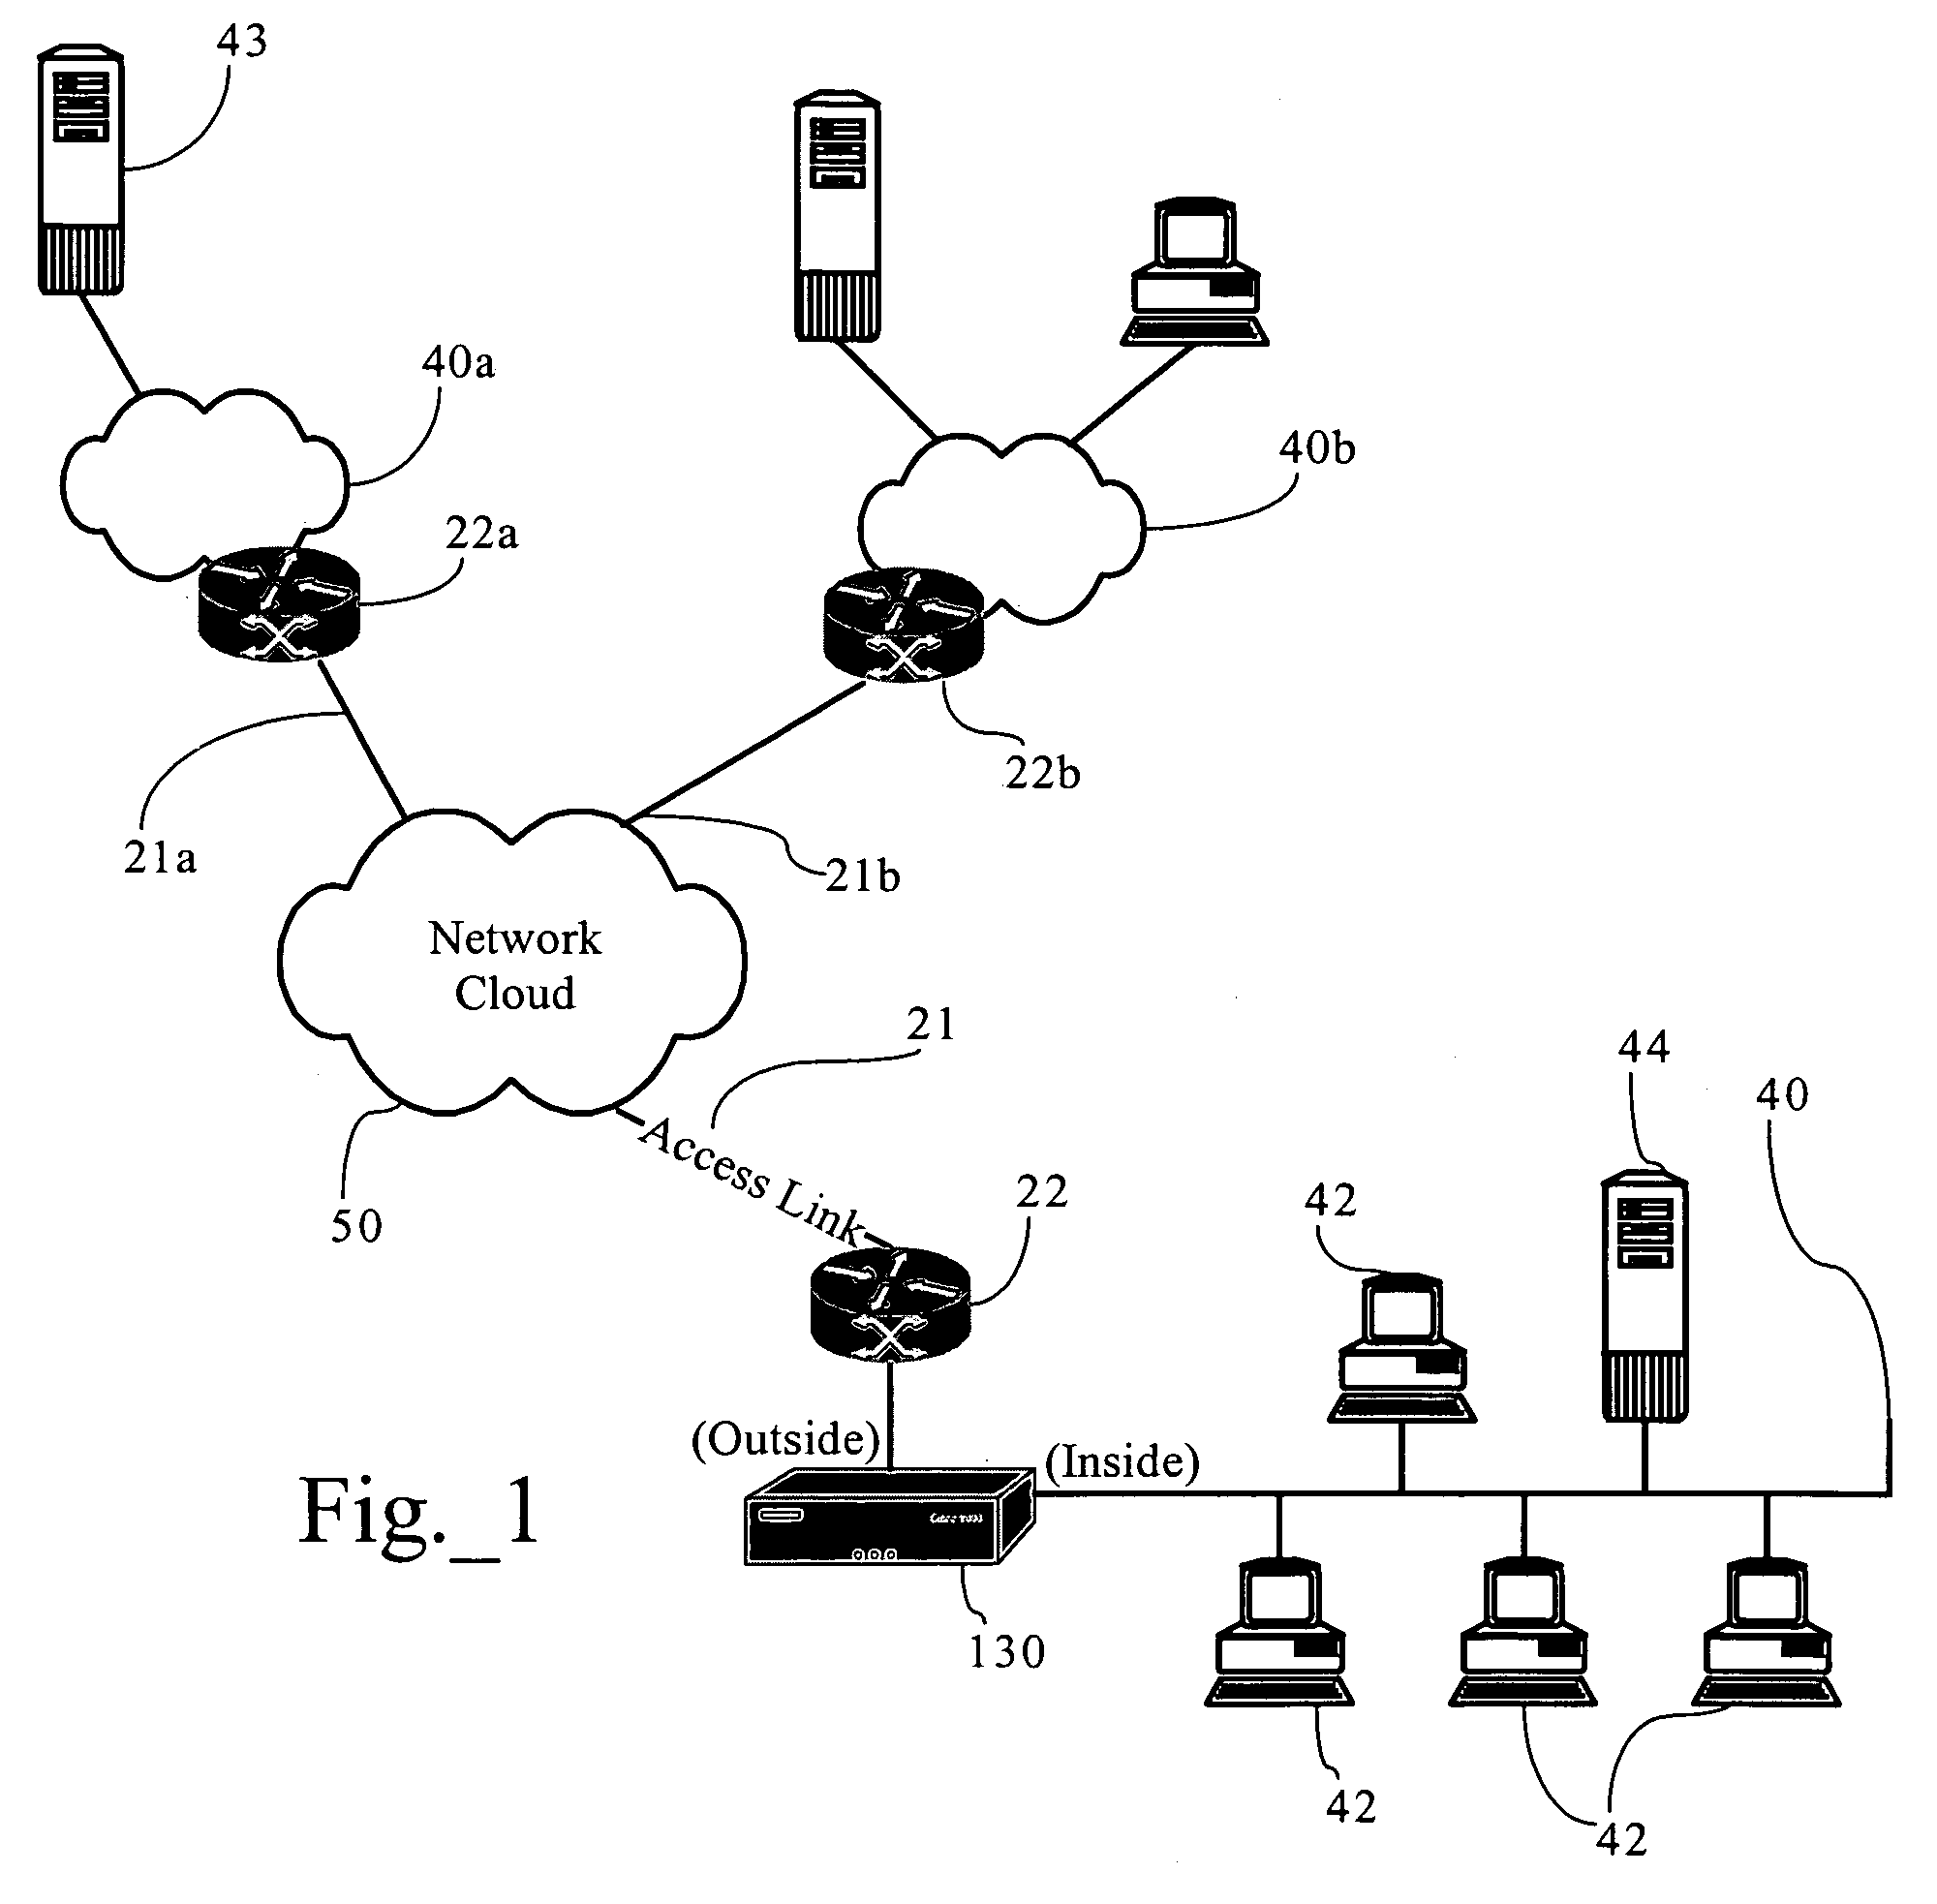 Partition configuration and creation mechanisms for network traffic management devices